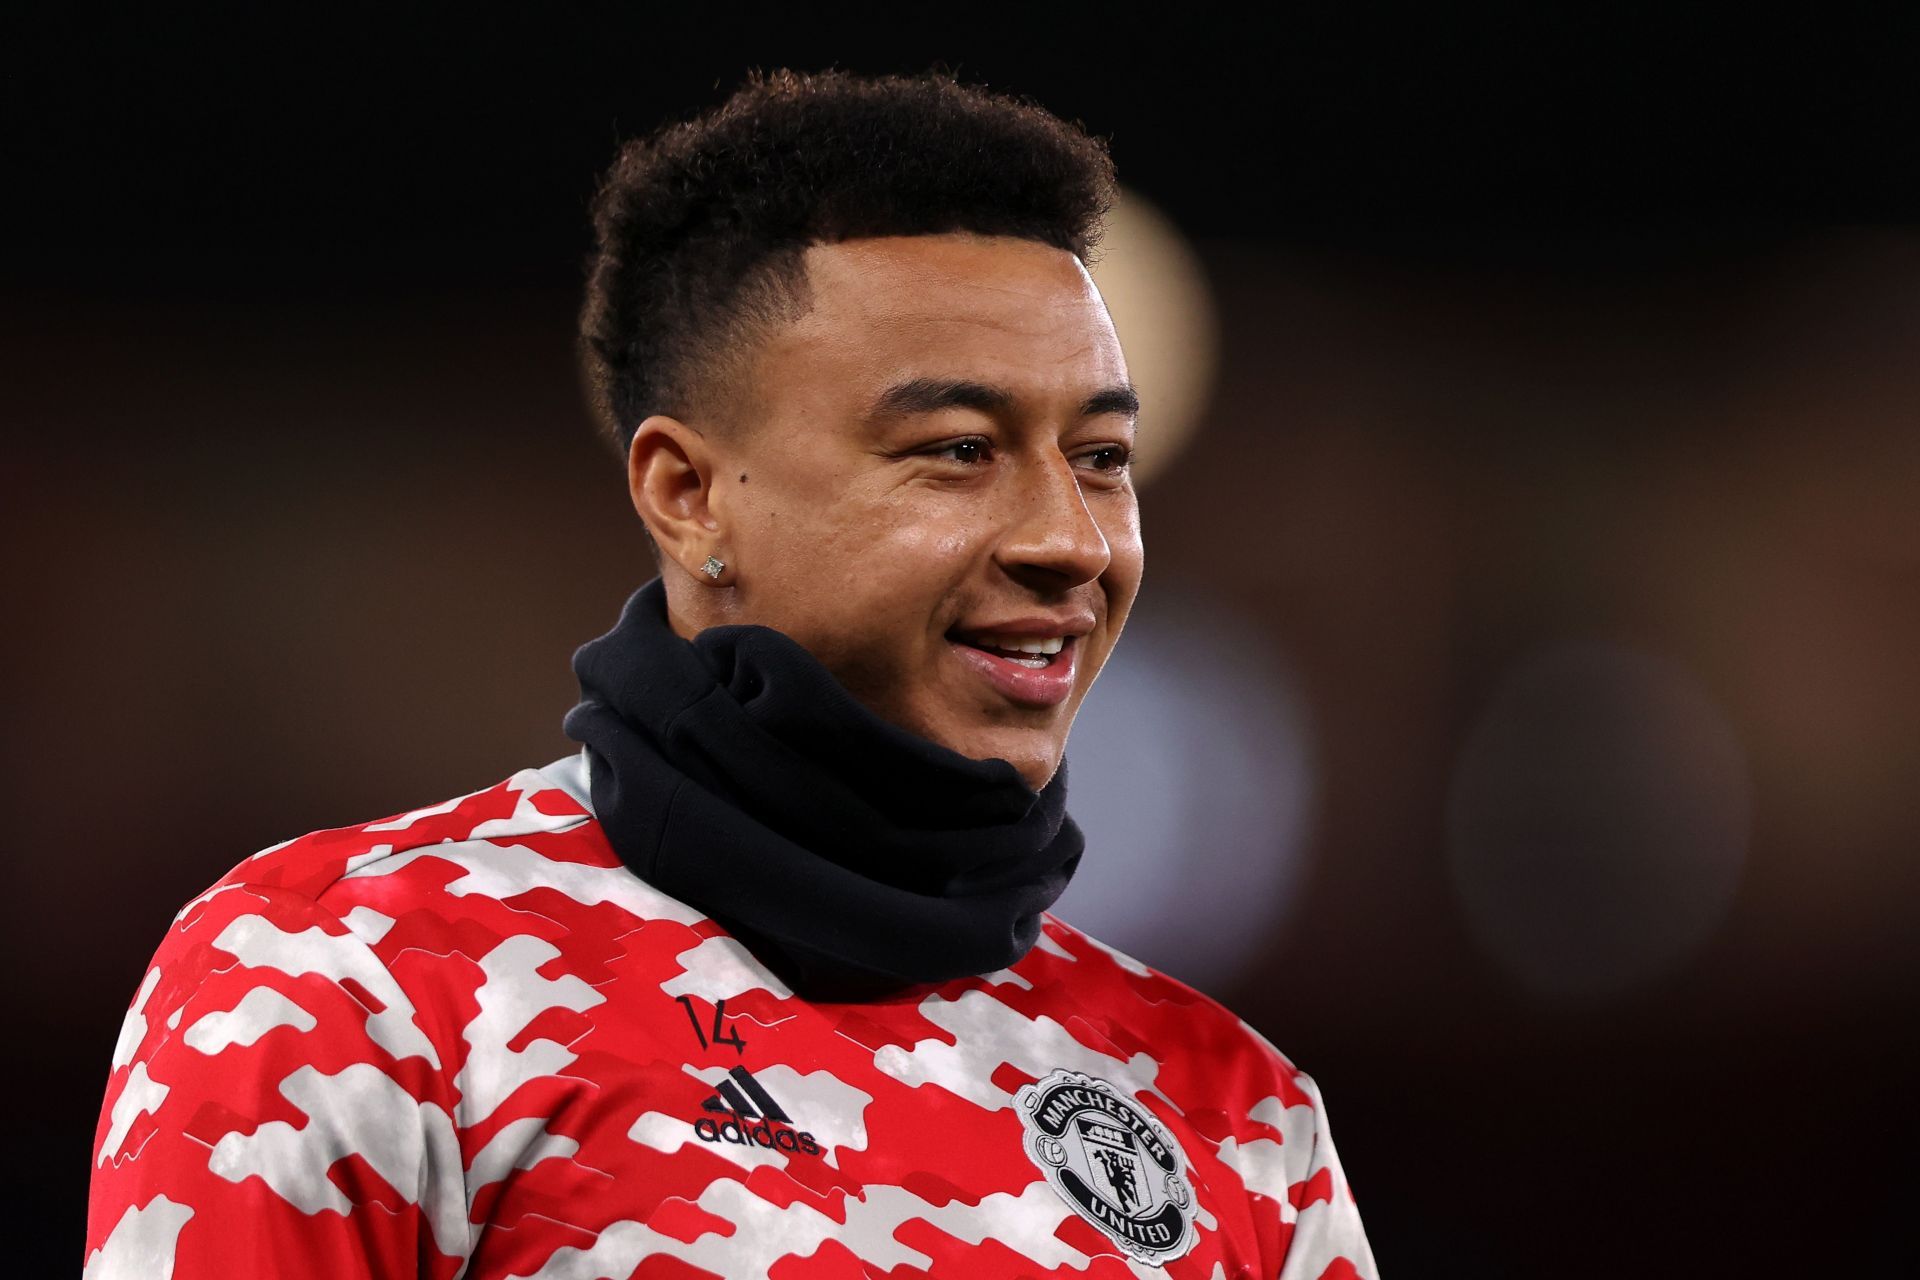 Gabriel Agbonlahor has urged Jesse Lingard to join West Ham United.